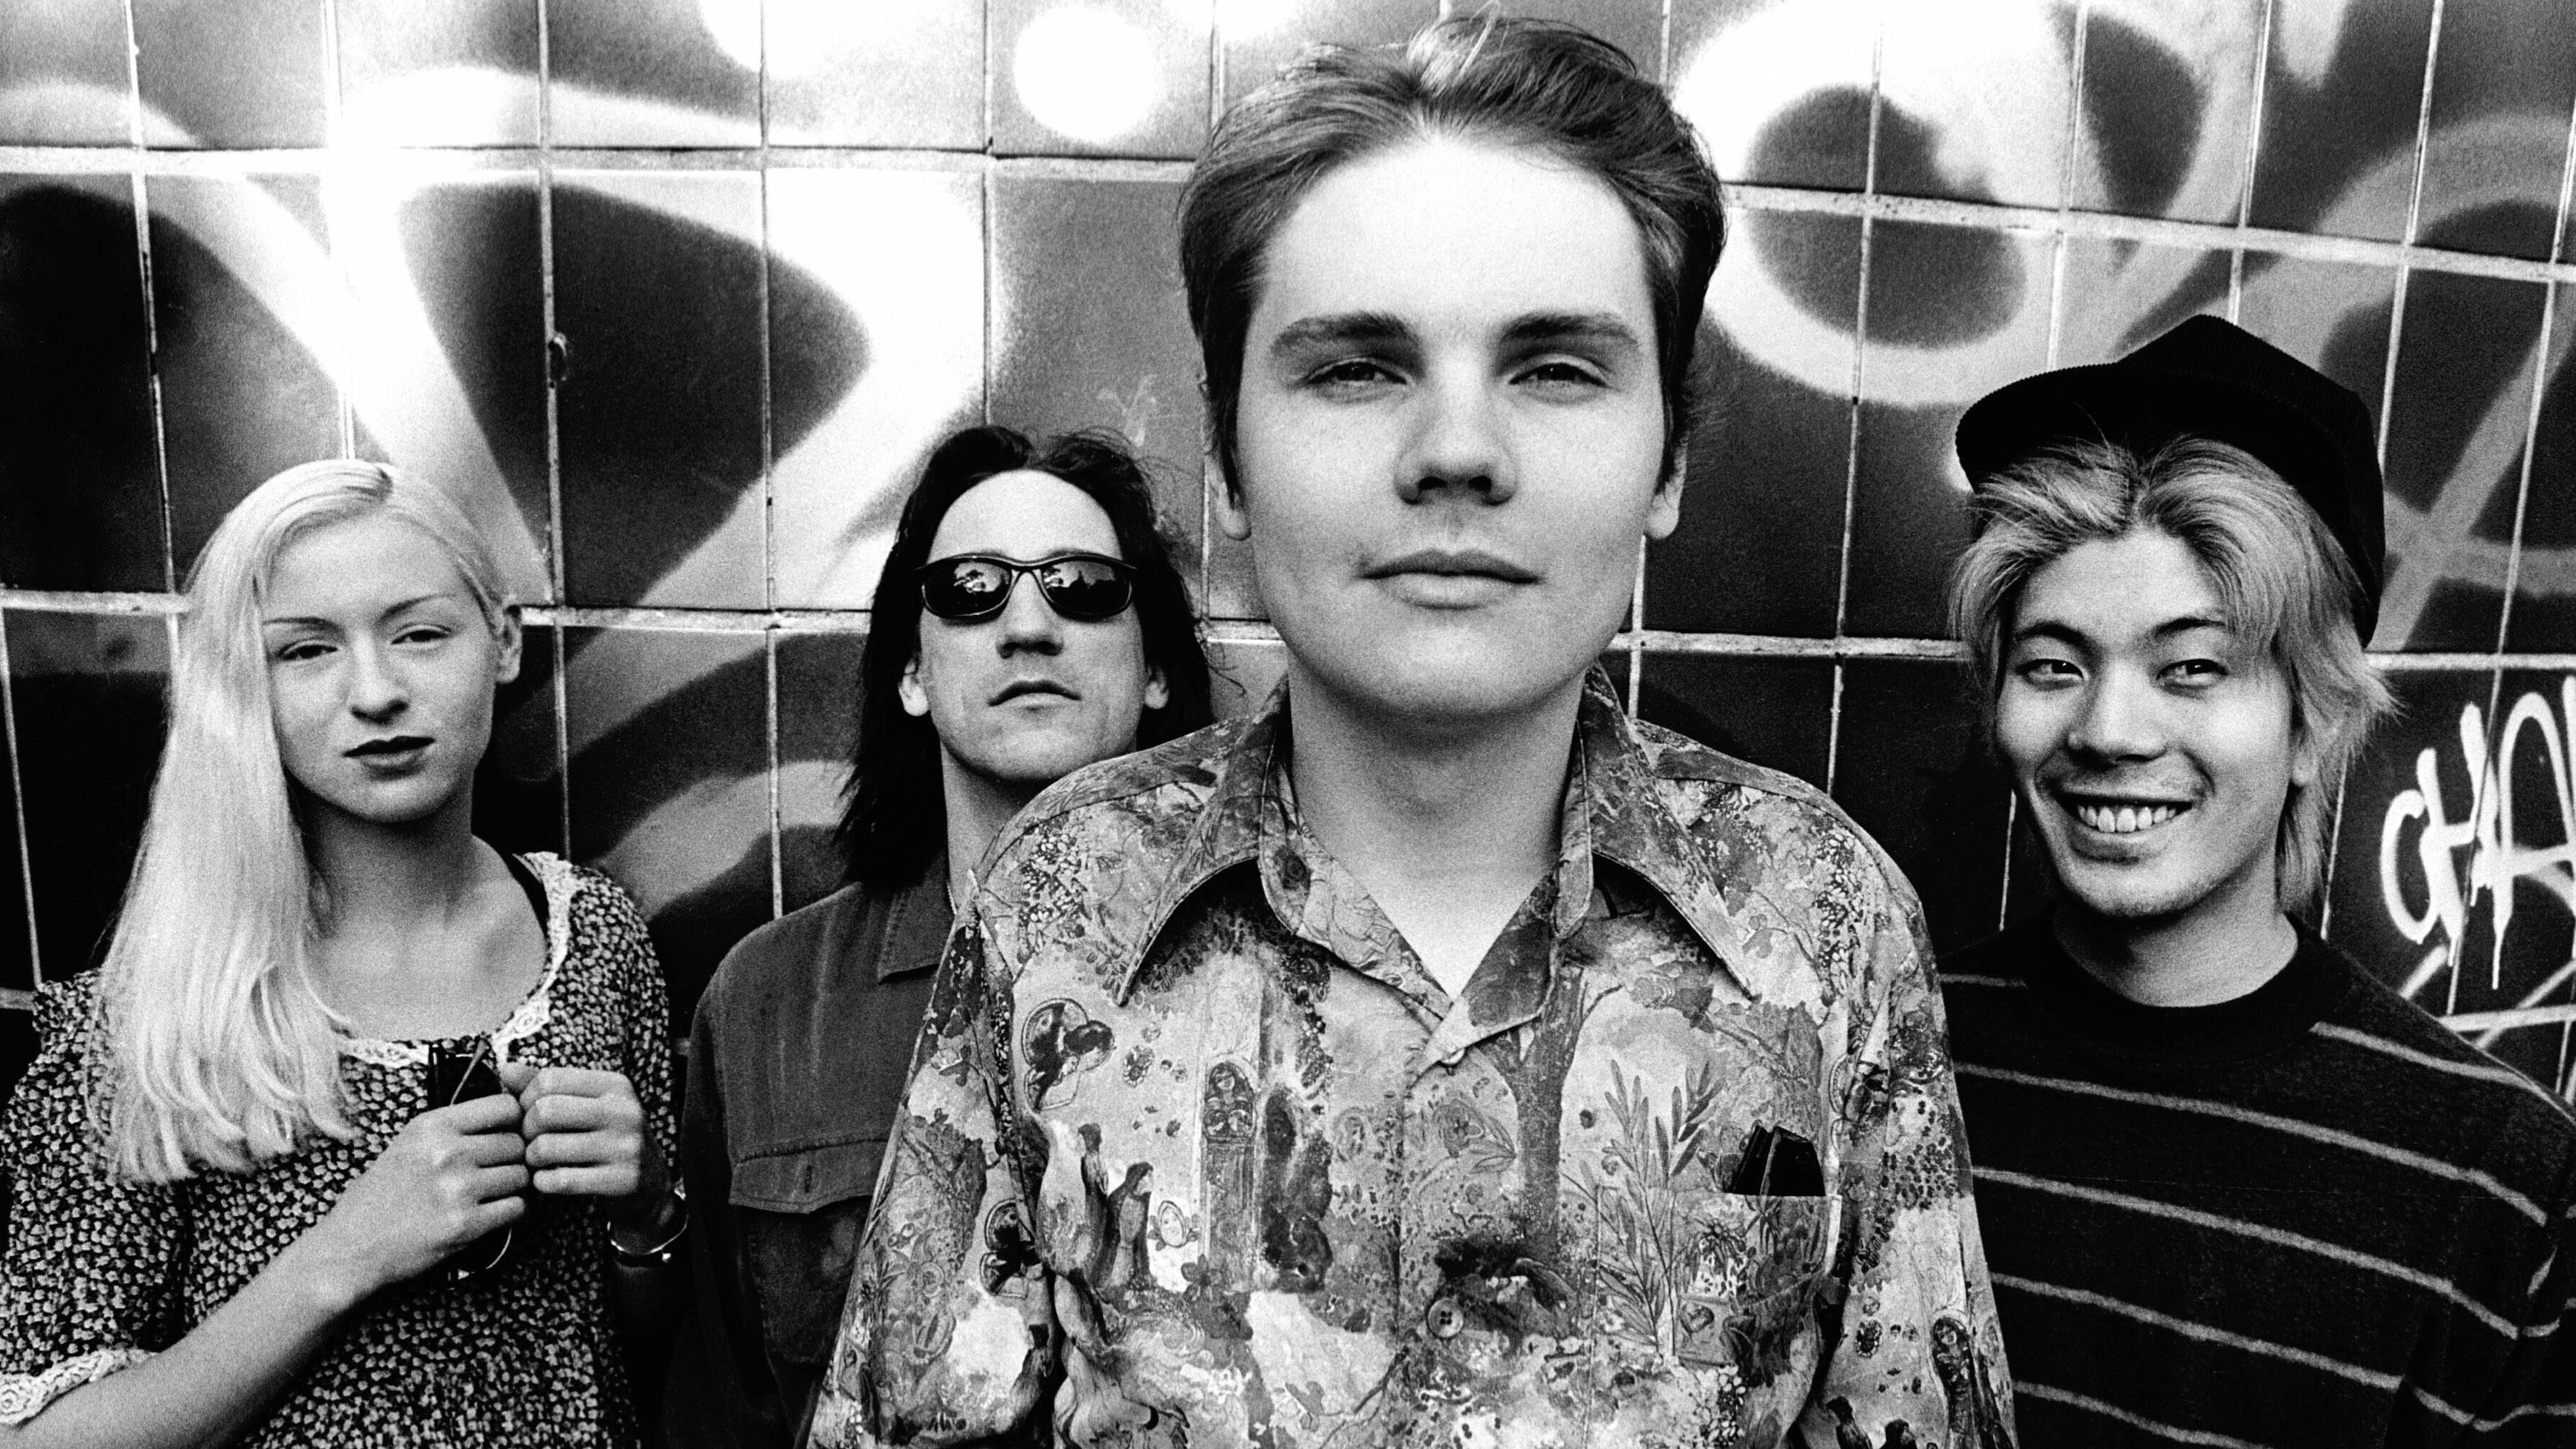 Why The Smashing Pumpkins' bassist disappeared without a trace